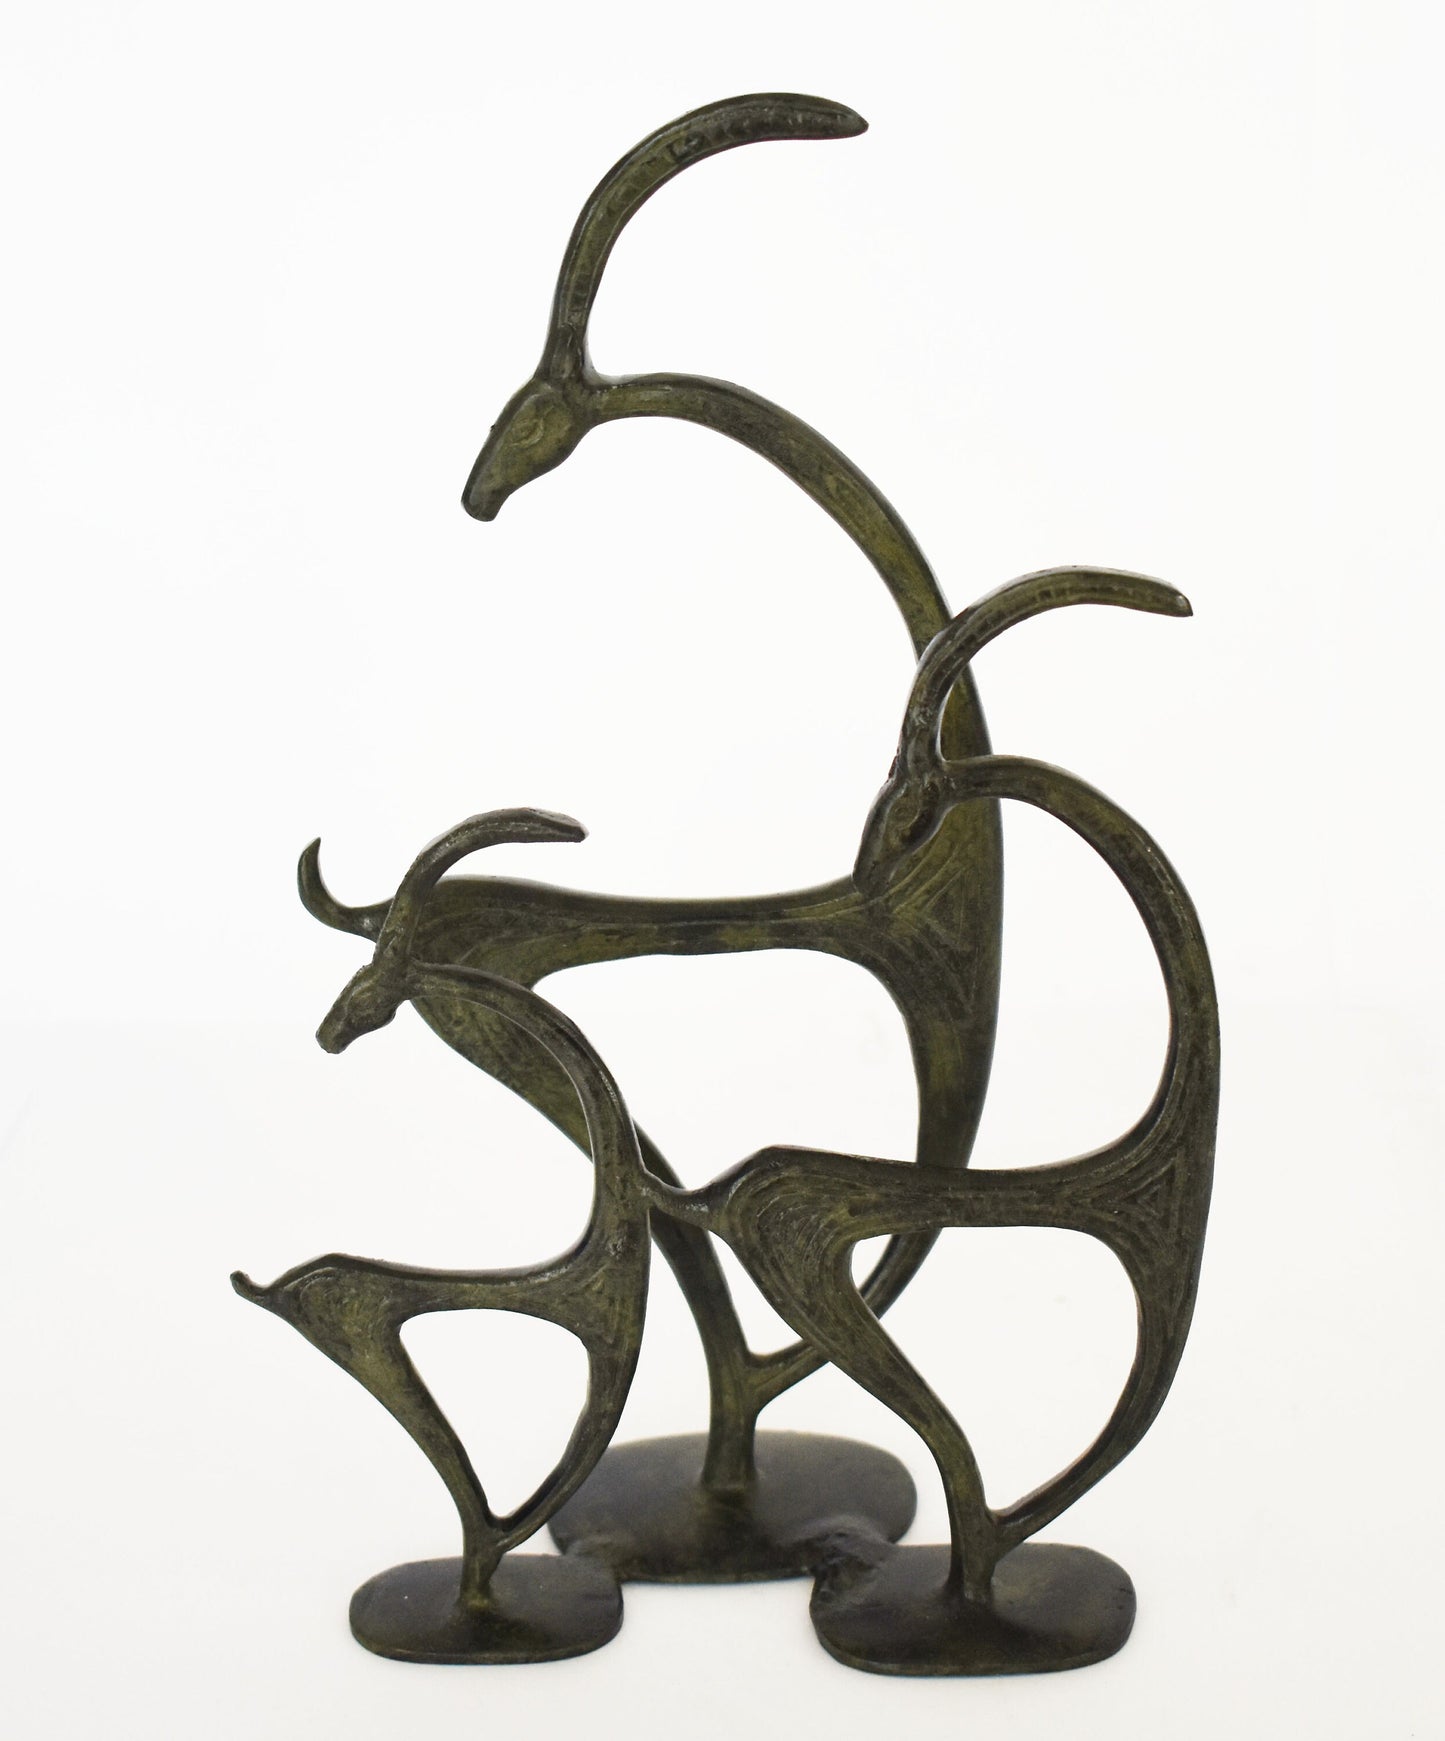 Complex with 3 Graceful Ibex - pure Bronze Sculpture - Symbols of Energy, Long Life, Fertility